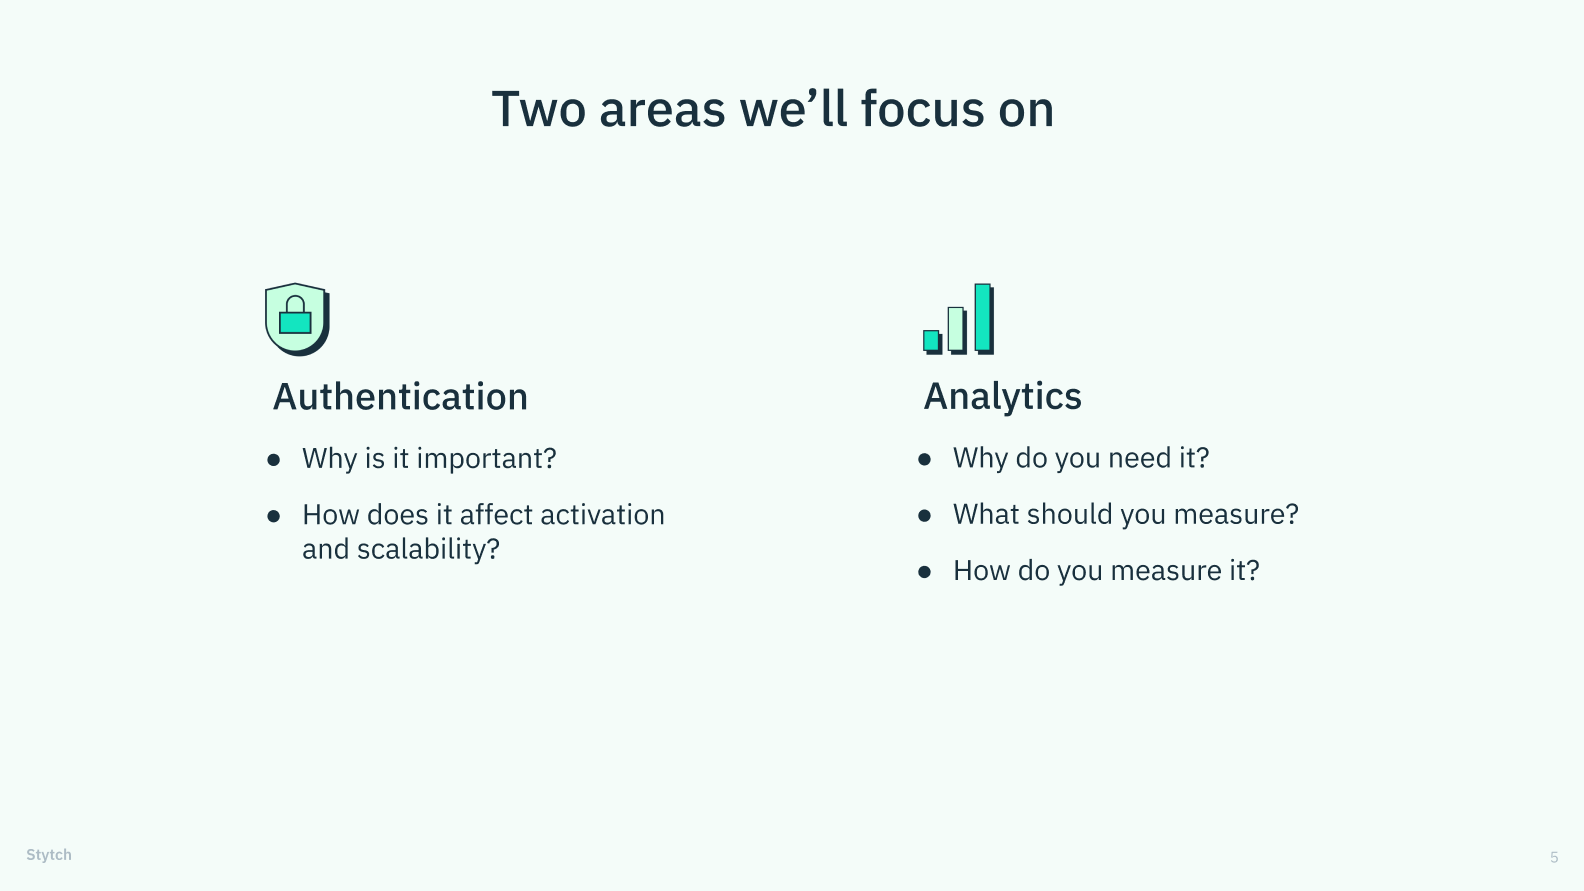 A slide from a presentation showing the two areas of focus: authentication and analytics